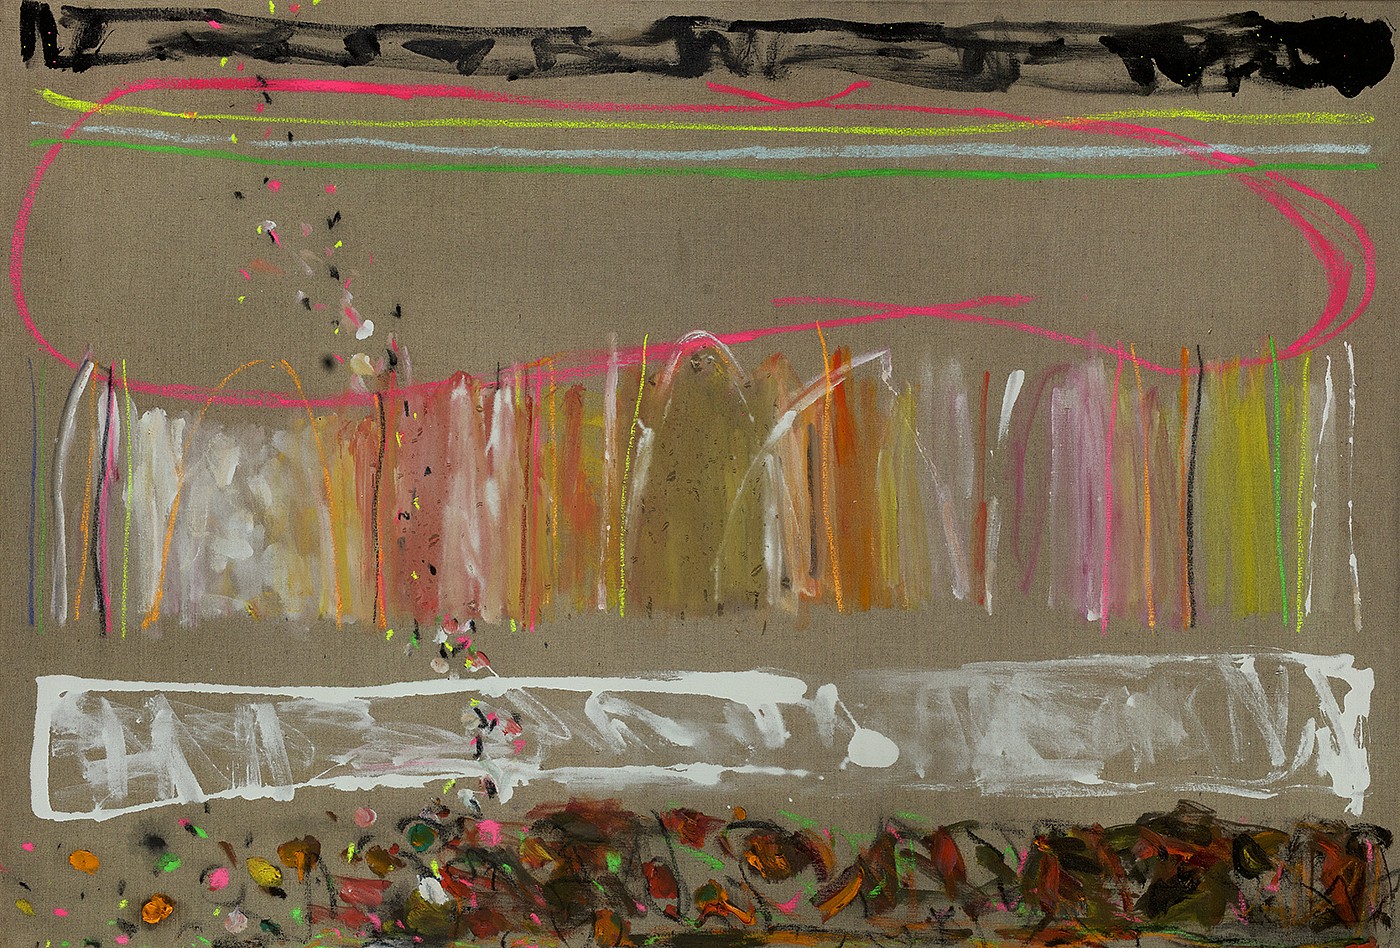 Joyce Weinstein, Country Fields with a Pink, 2014
Oil and mixed media on linen, 40 x 58 in. (101.6 x 147.3 cm)
WEI-00001